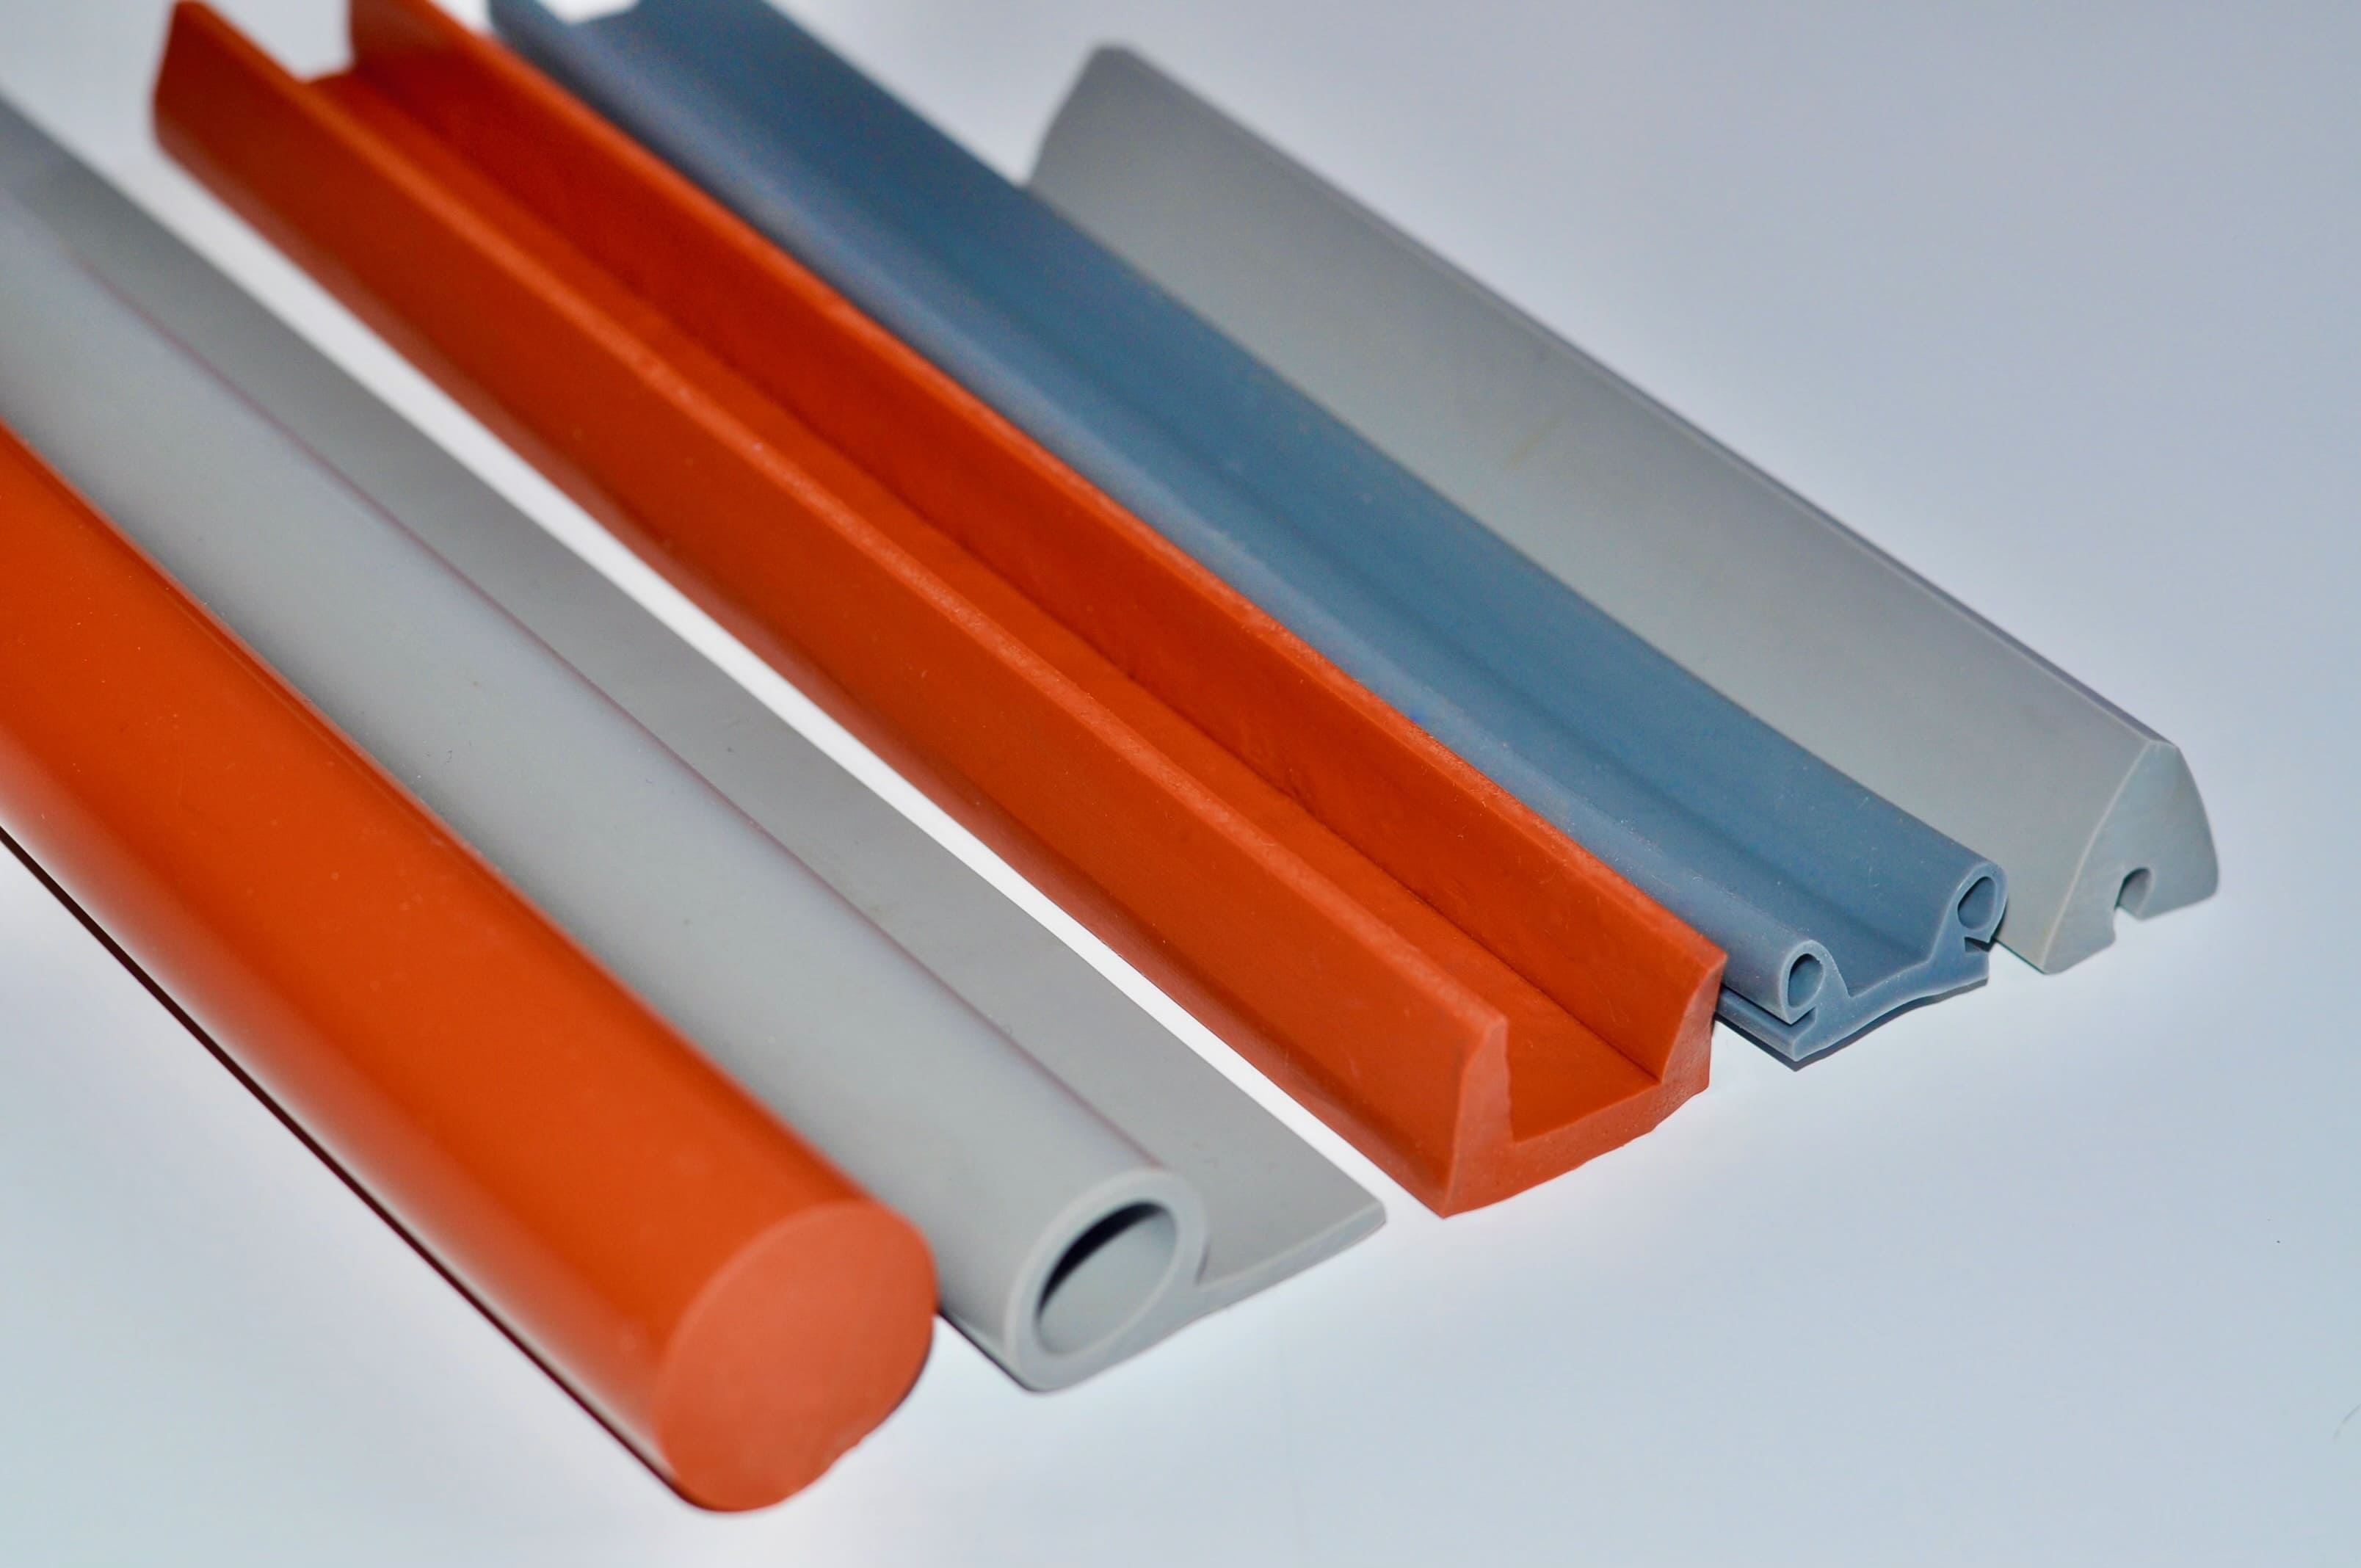 Assorted silicone rubber parts of varying colors and profile shapes resting side-by-side